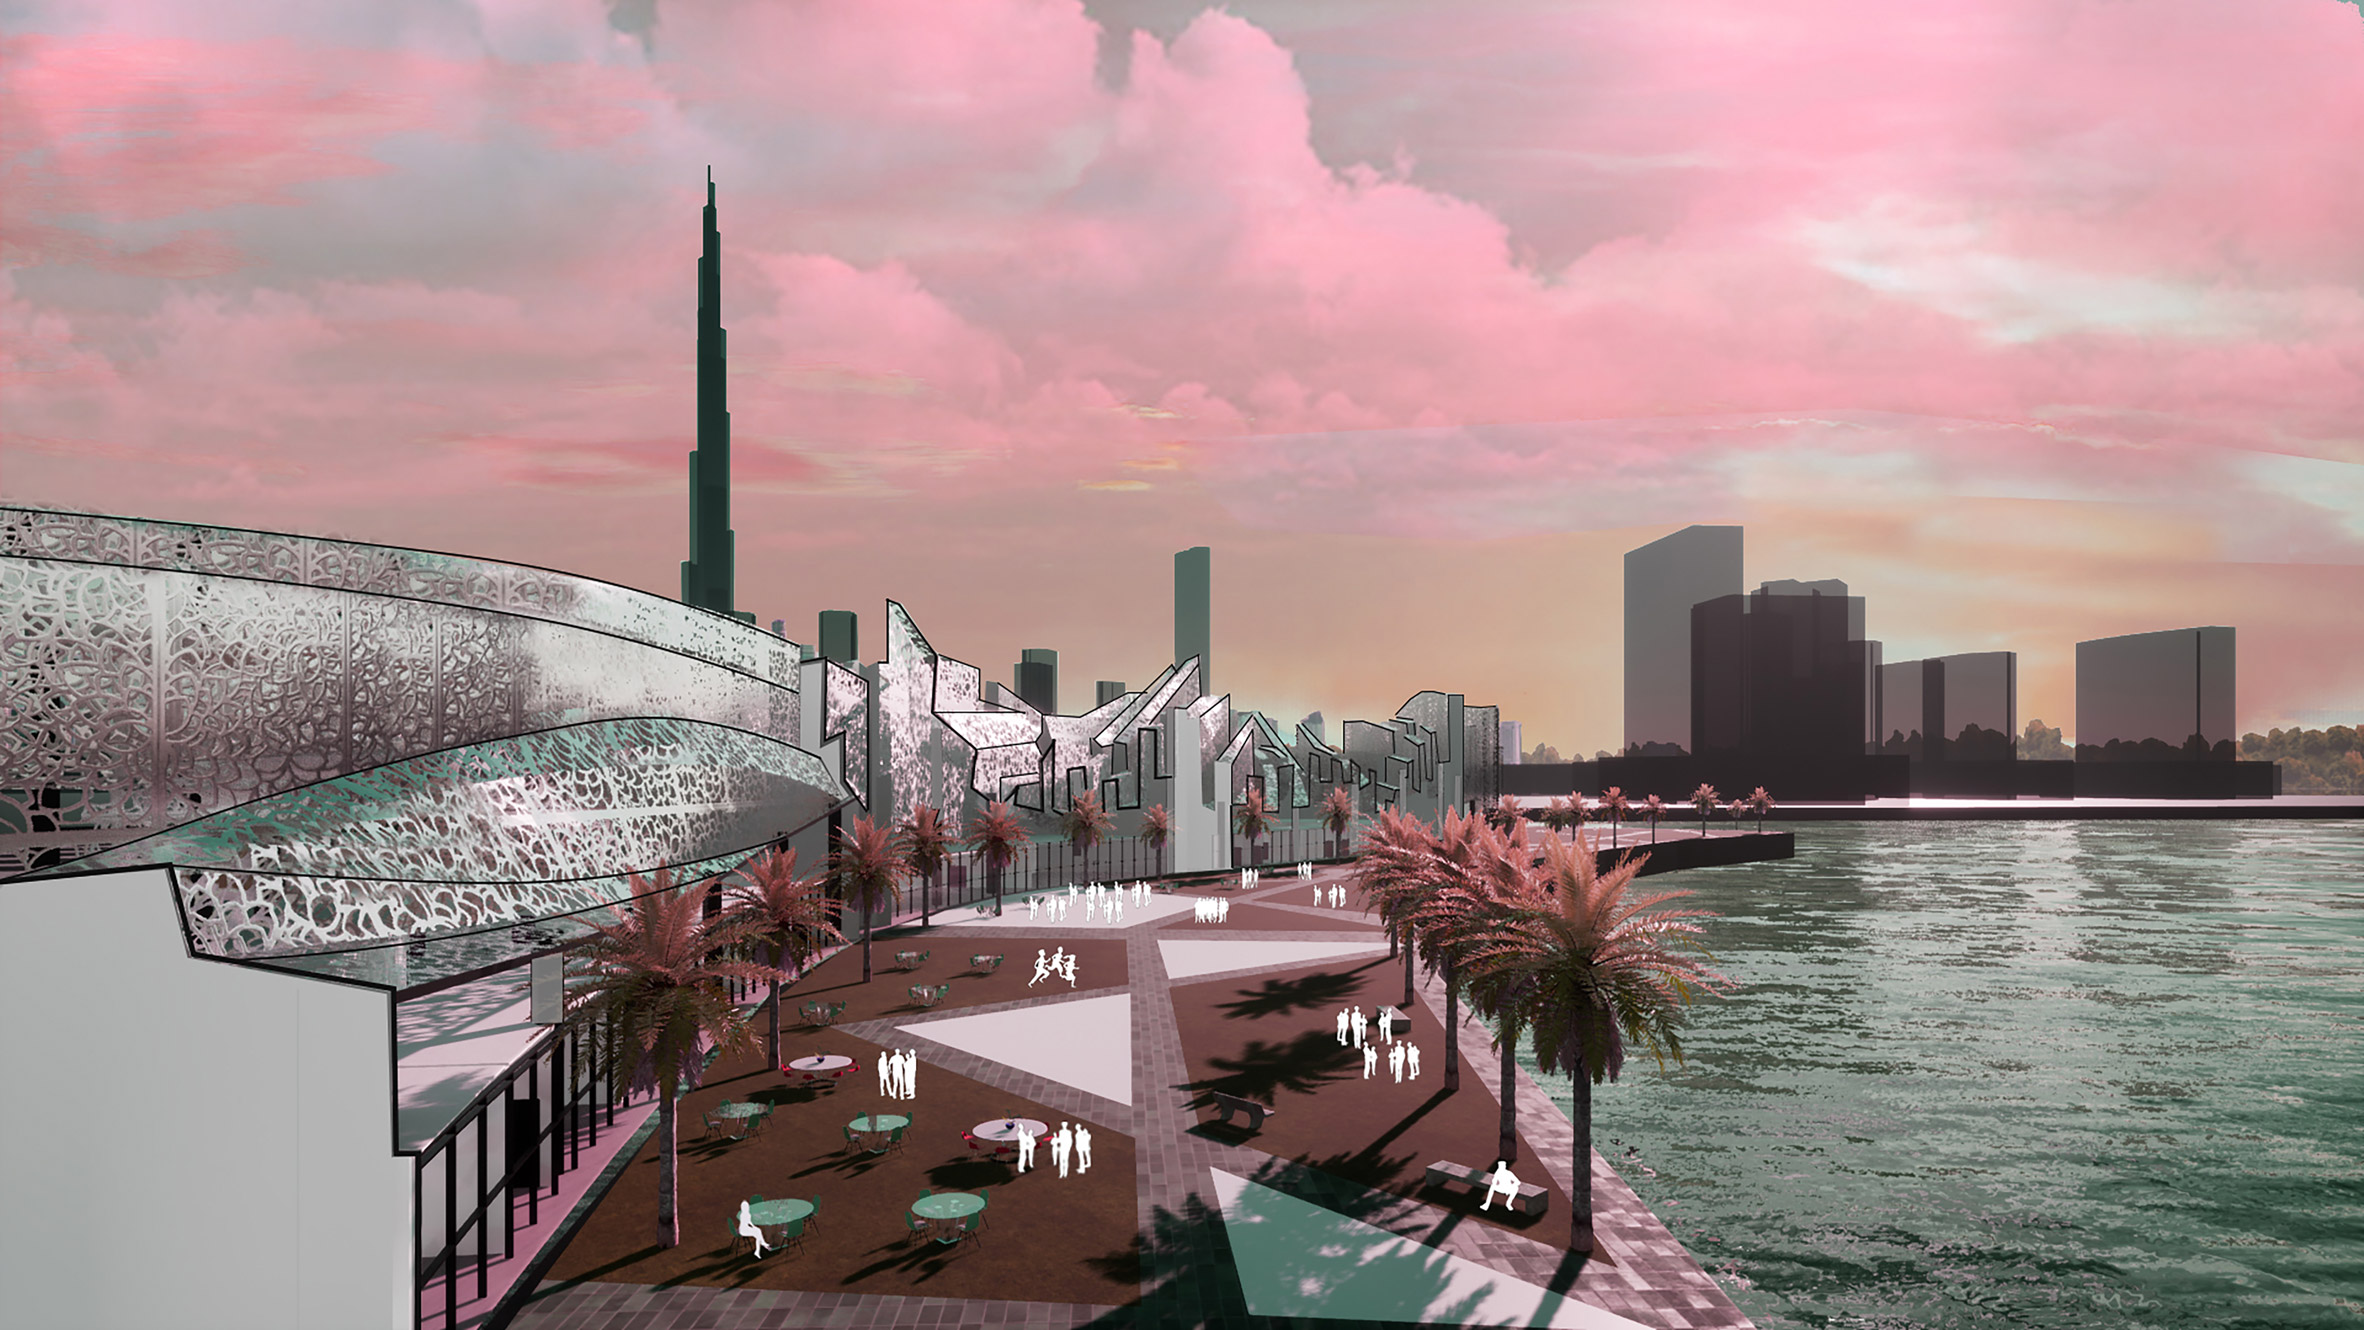 Projects from AUD architecture grads tackle social issues in the UAE